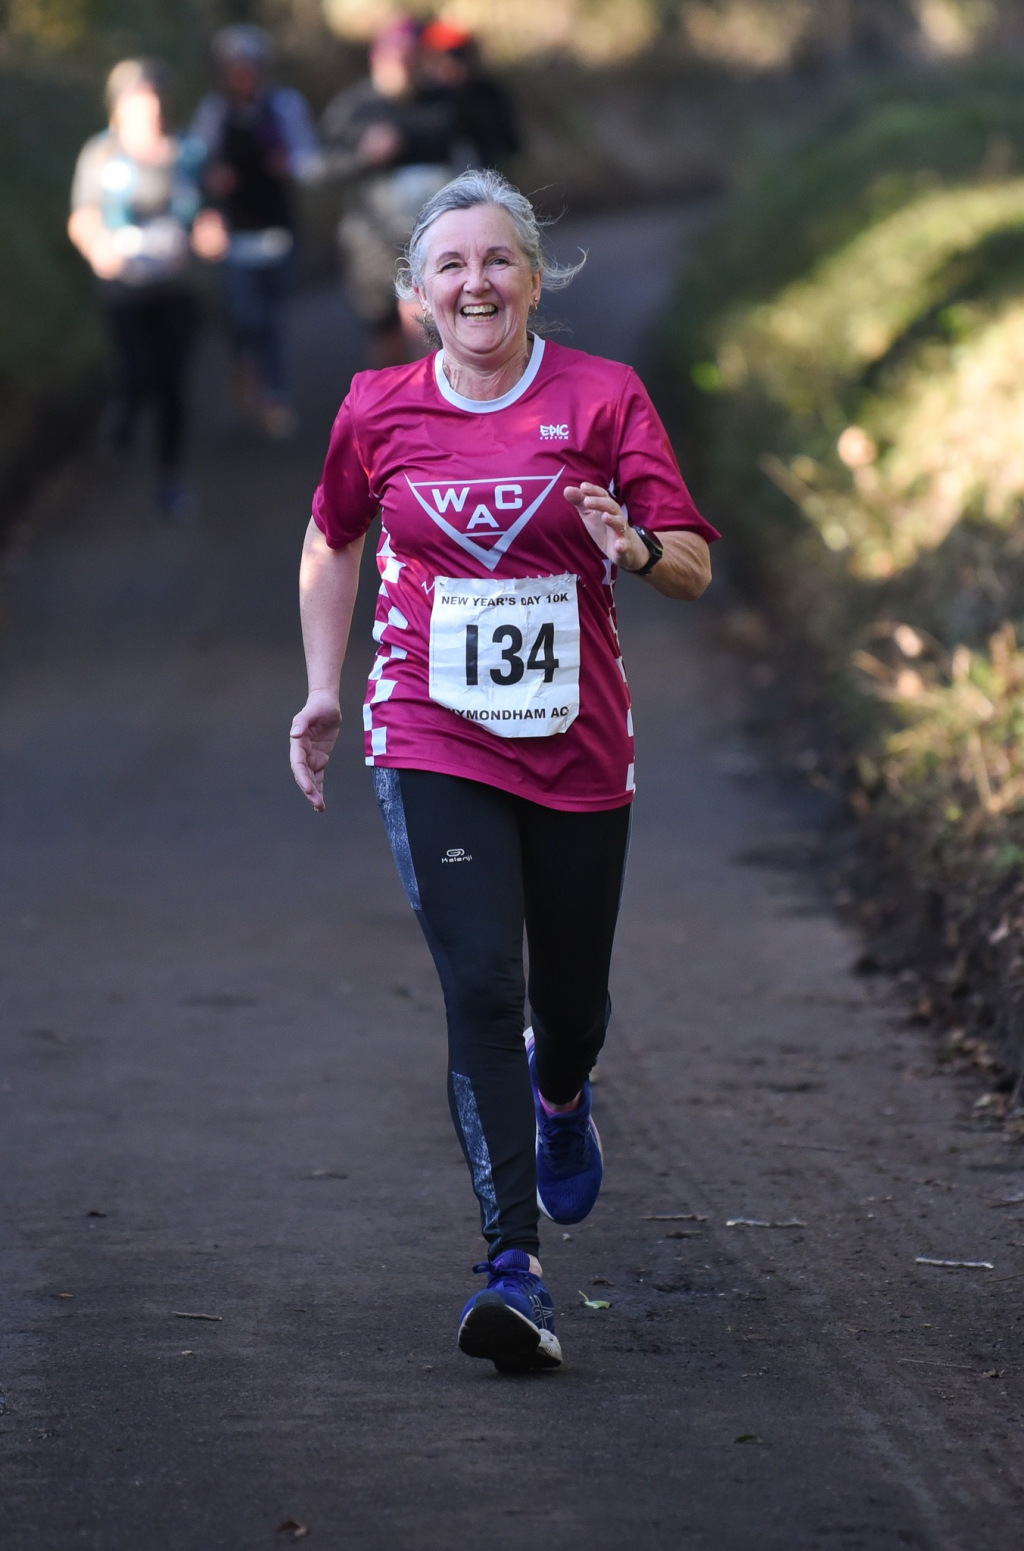 Lady running a race